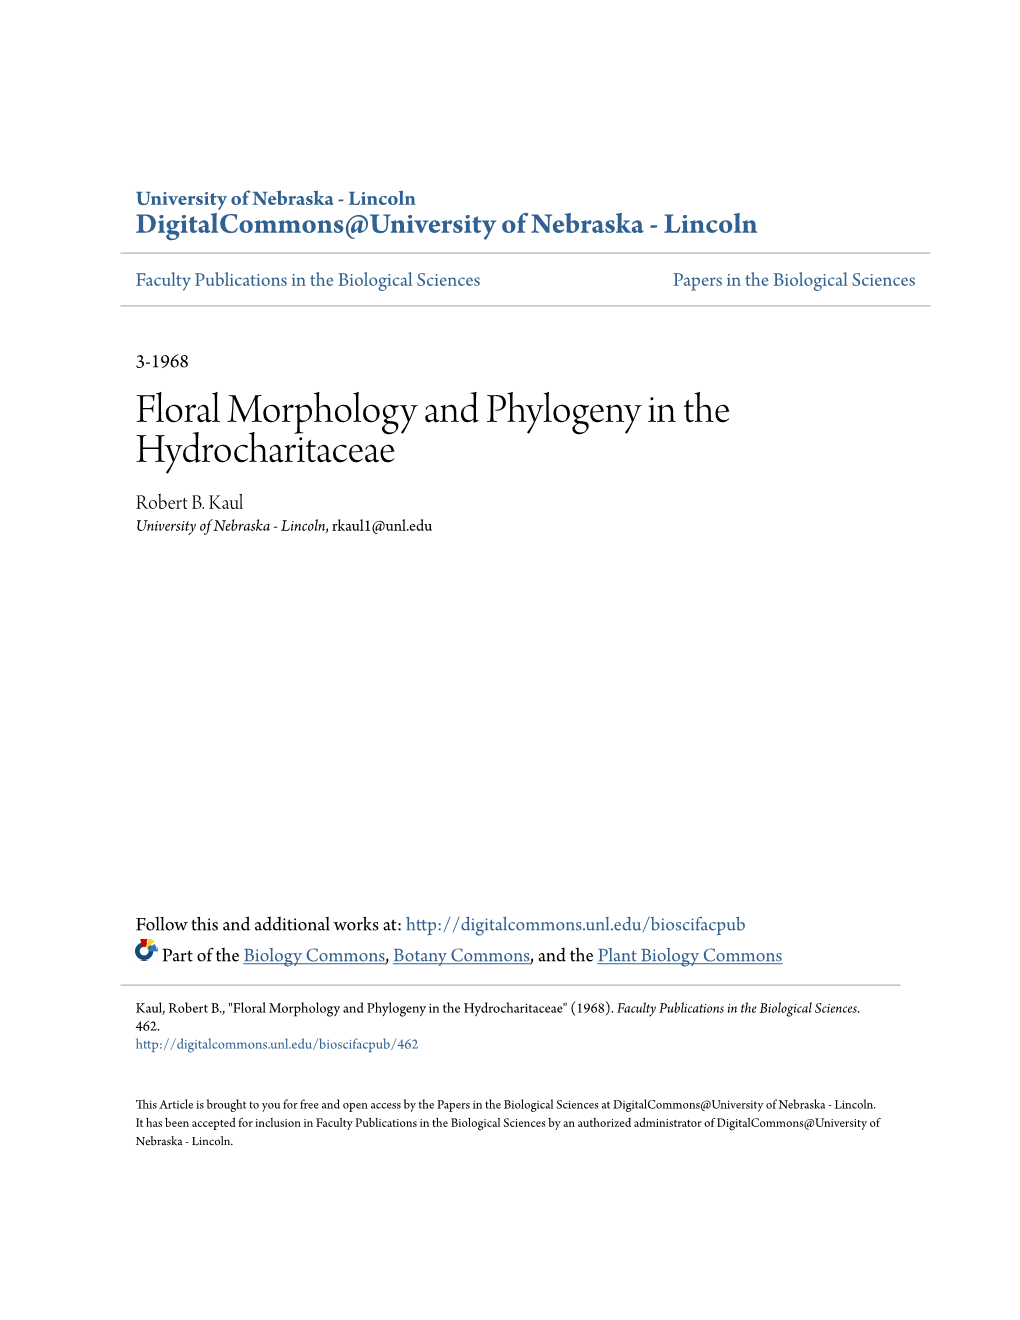 Floral Morphology and Phylogeny in the Hydrocharitaceae Robert B